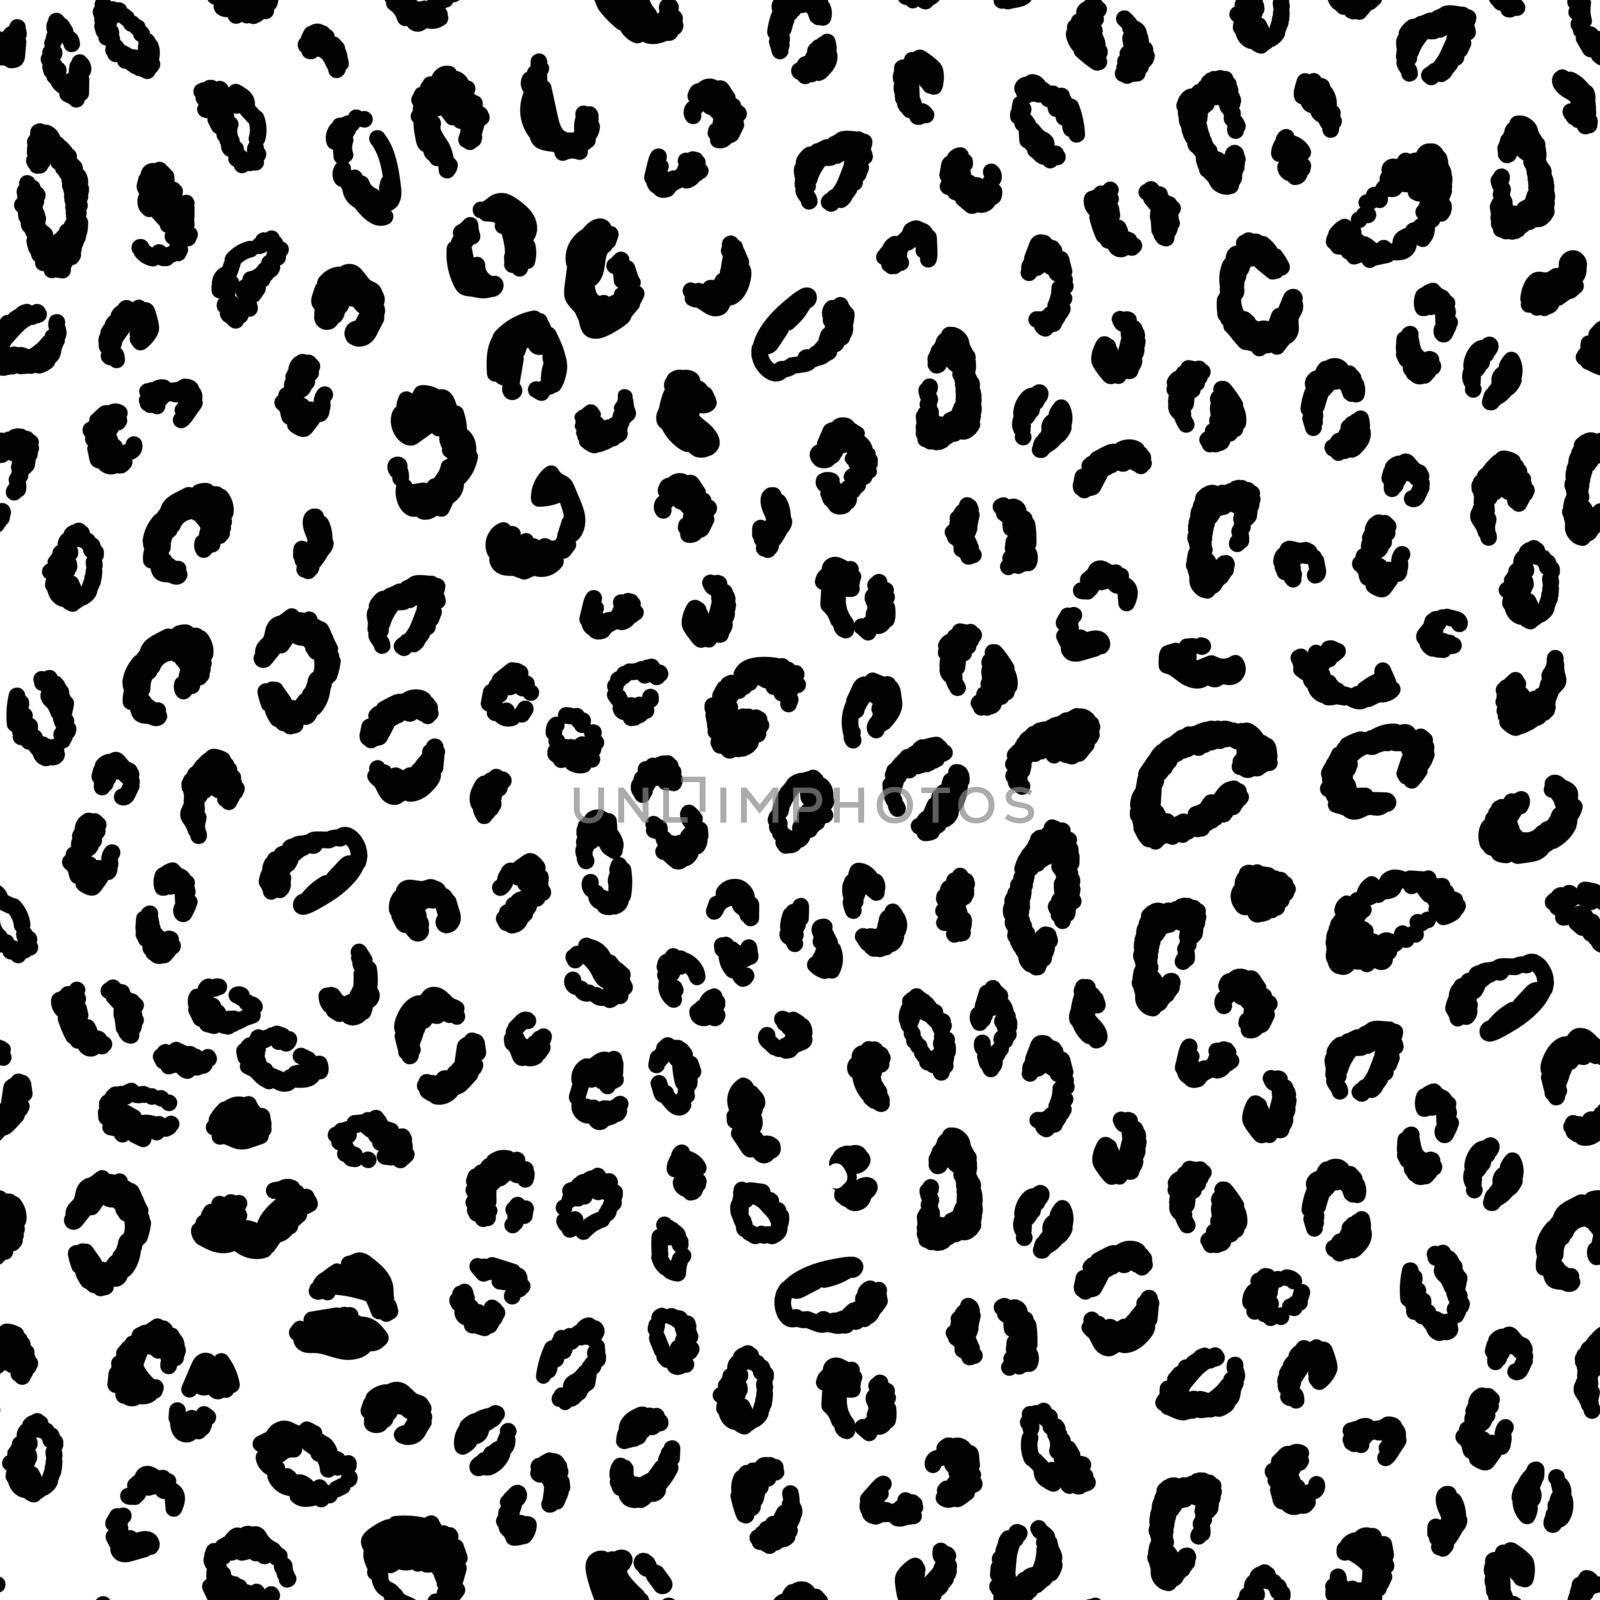 Abstract modern leopard seamless pattern. Animals trendy background. Black and white decorative vector illustration for print, card, postcard, fabric, textile. Modern ornament of stylized skin by allaku